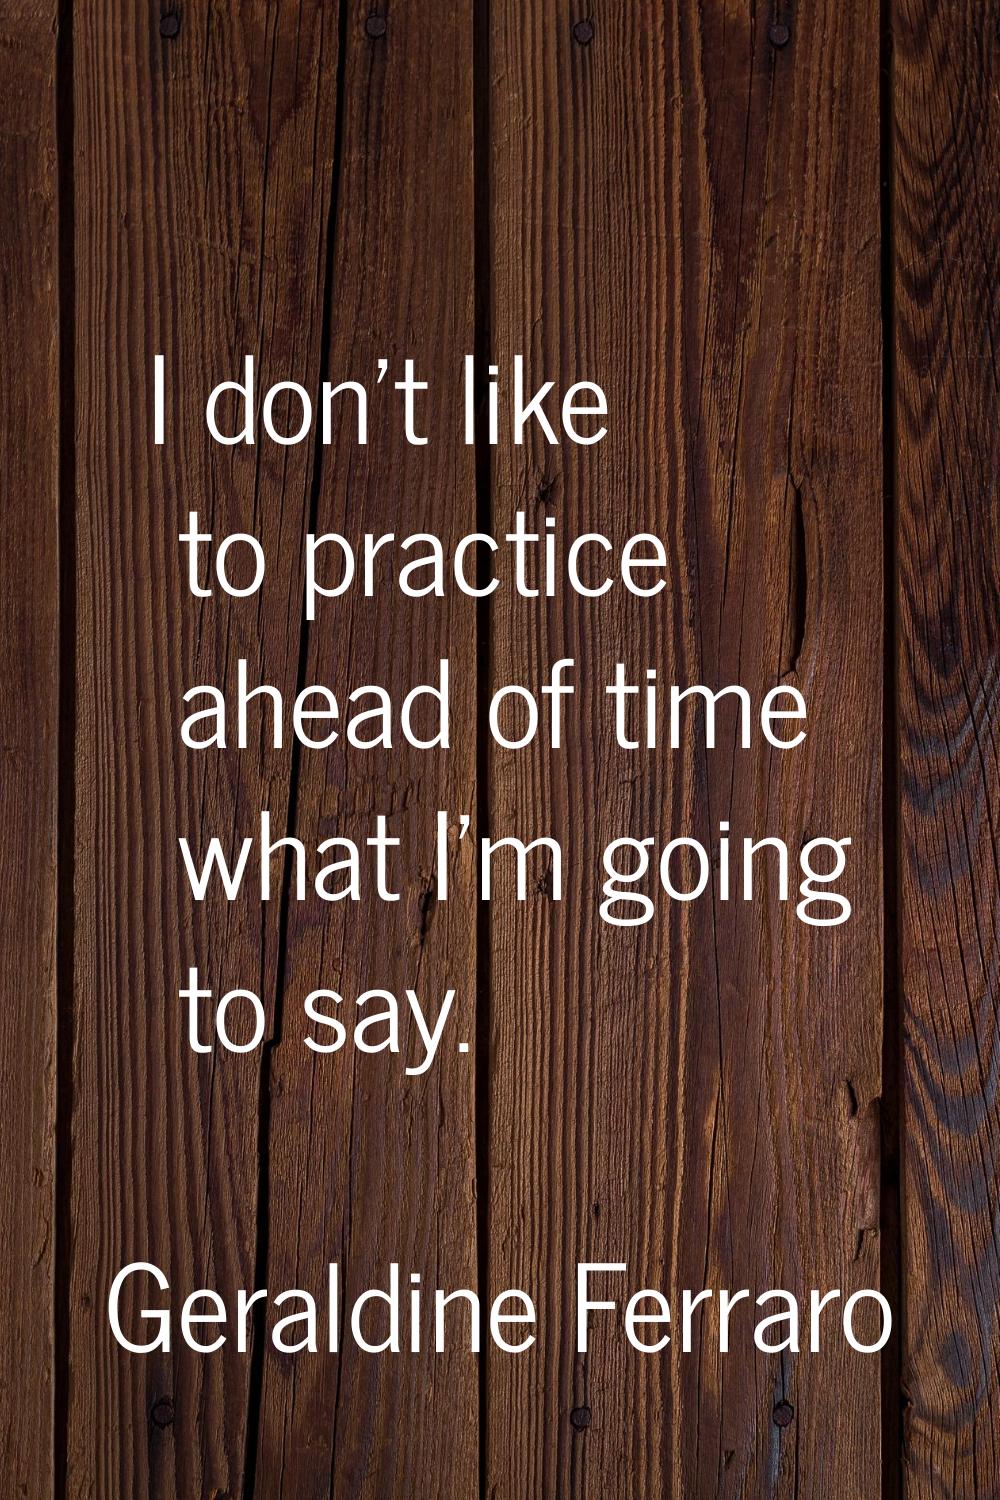 I don't like to practice ahead of time what I'm going to say.